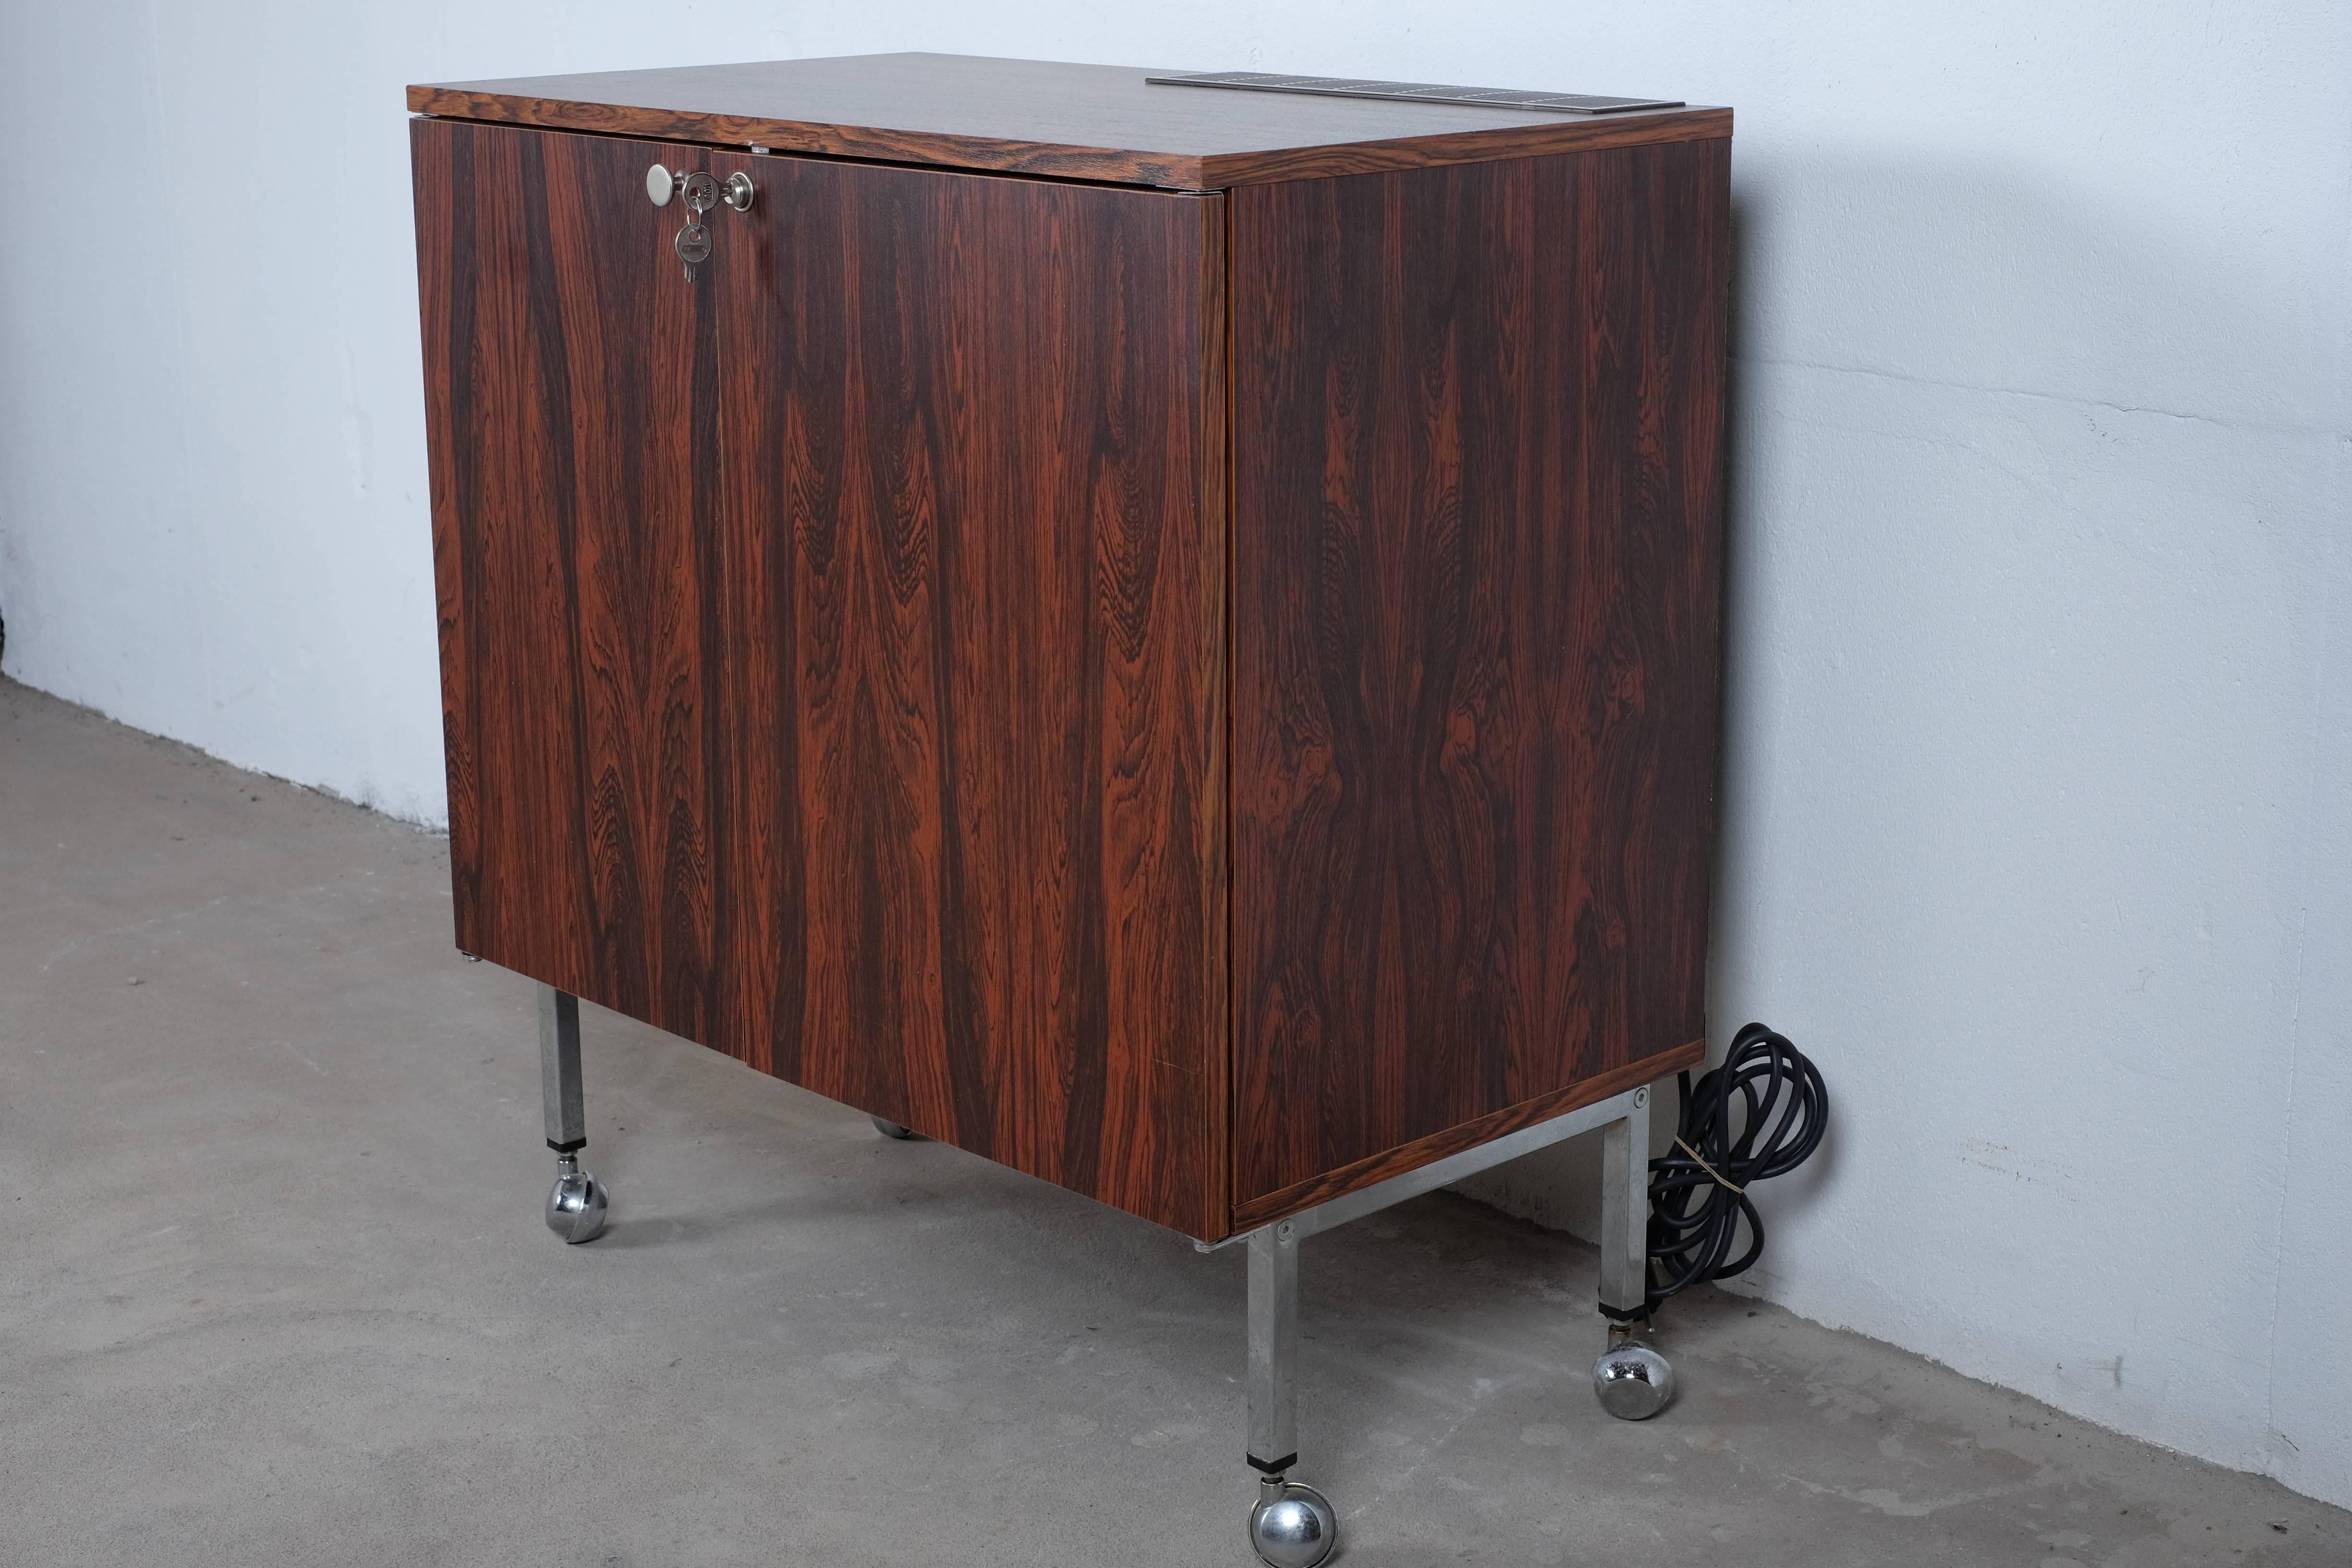 Desirable rosewood bar cabinet in rosewood with fridge (Electrolux) and a small freezer for ice cubes. Light turns on when the door is opened. Locking cabinet opens to reveal storage for all necessary bar accoutrements

I haven’t been able to find